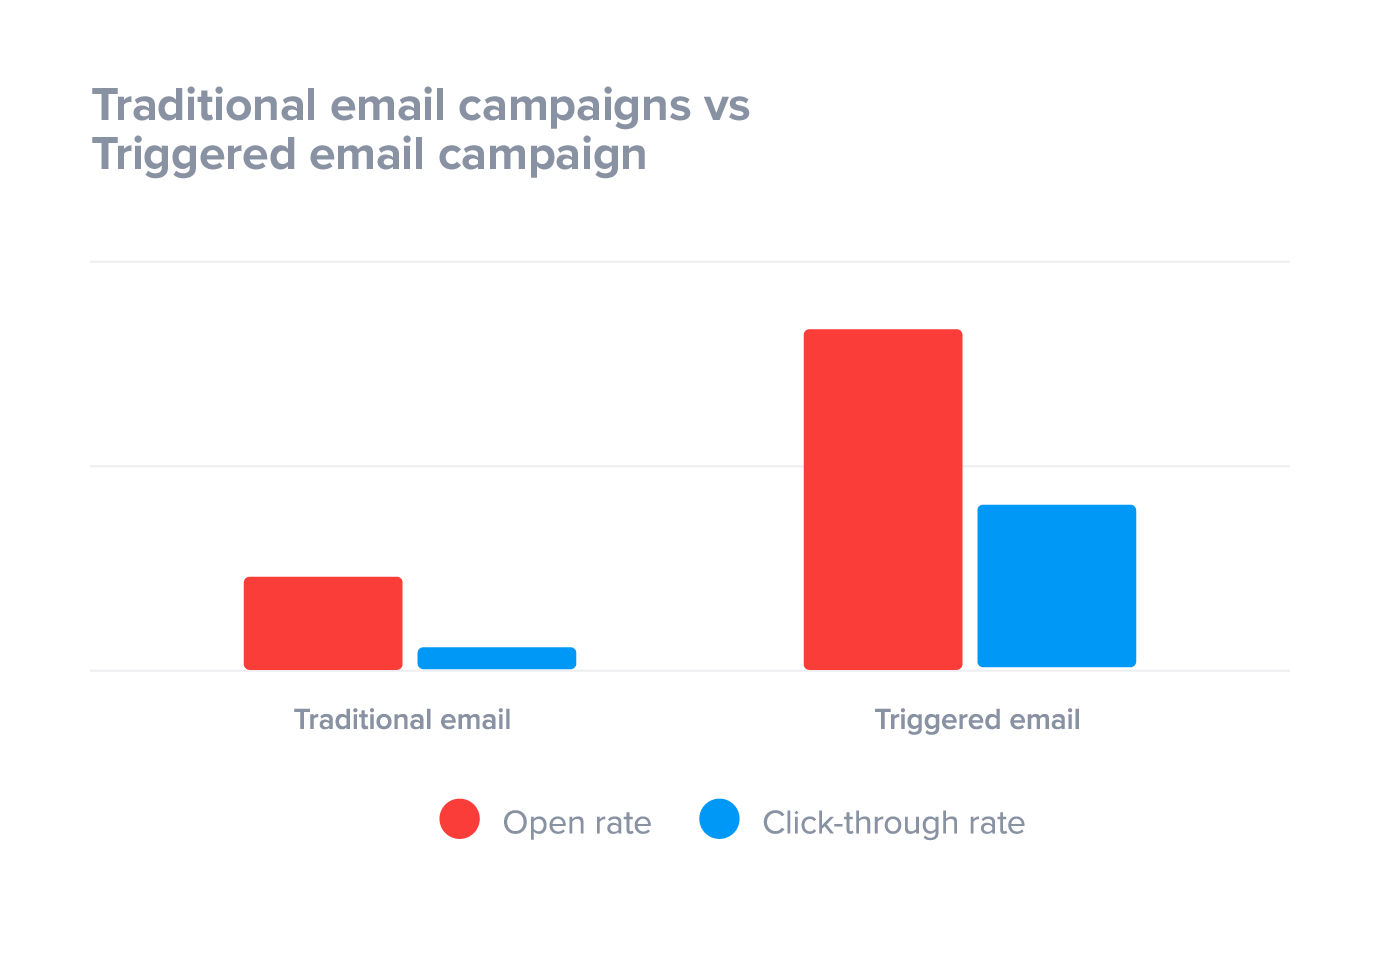 Triggered email campaigns outperform traditional email campaigns